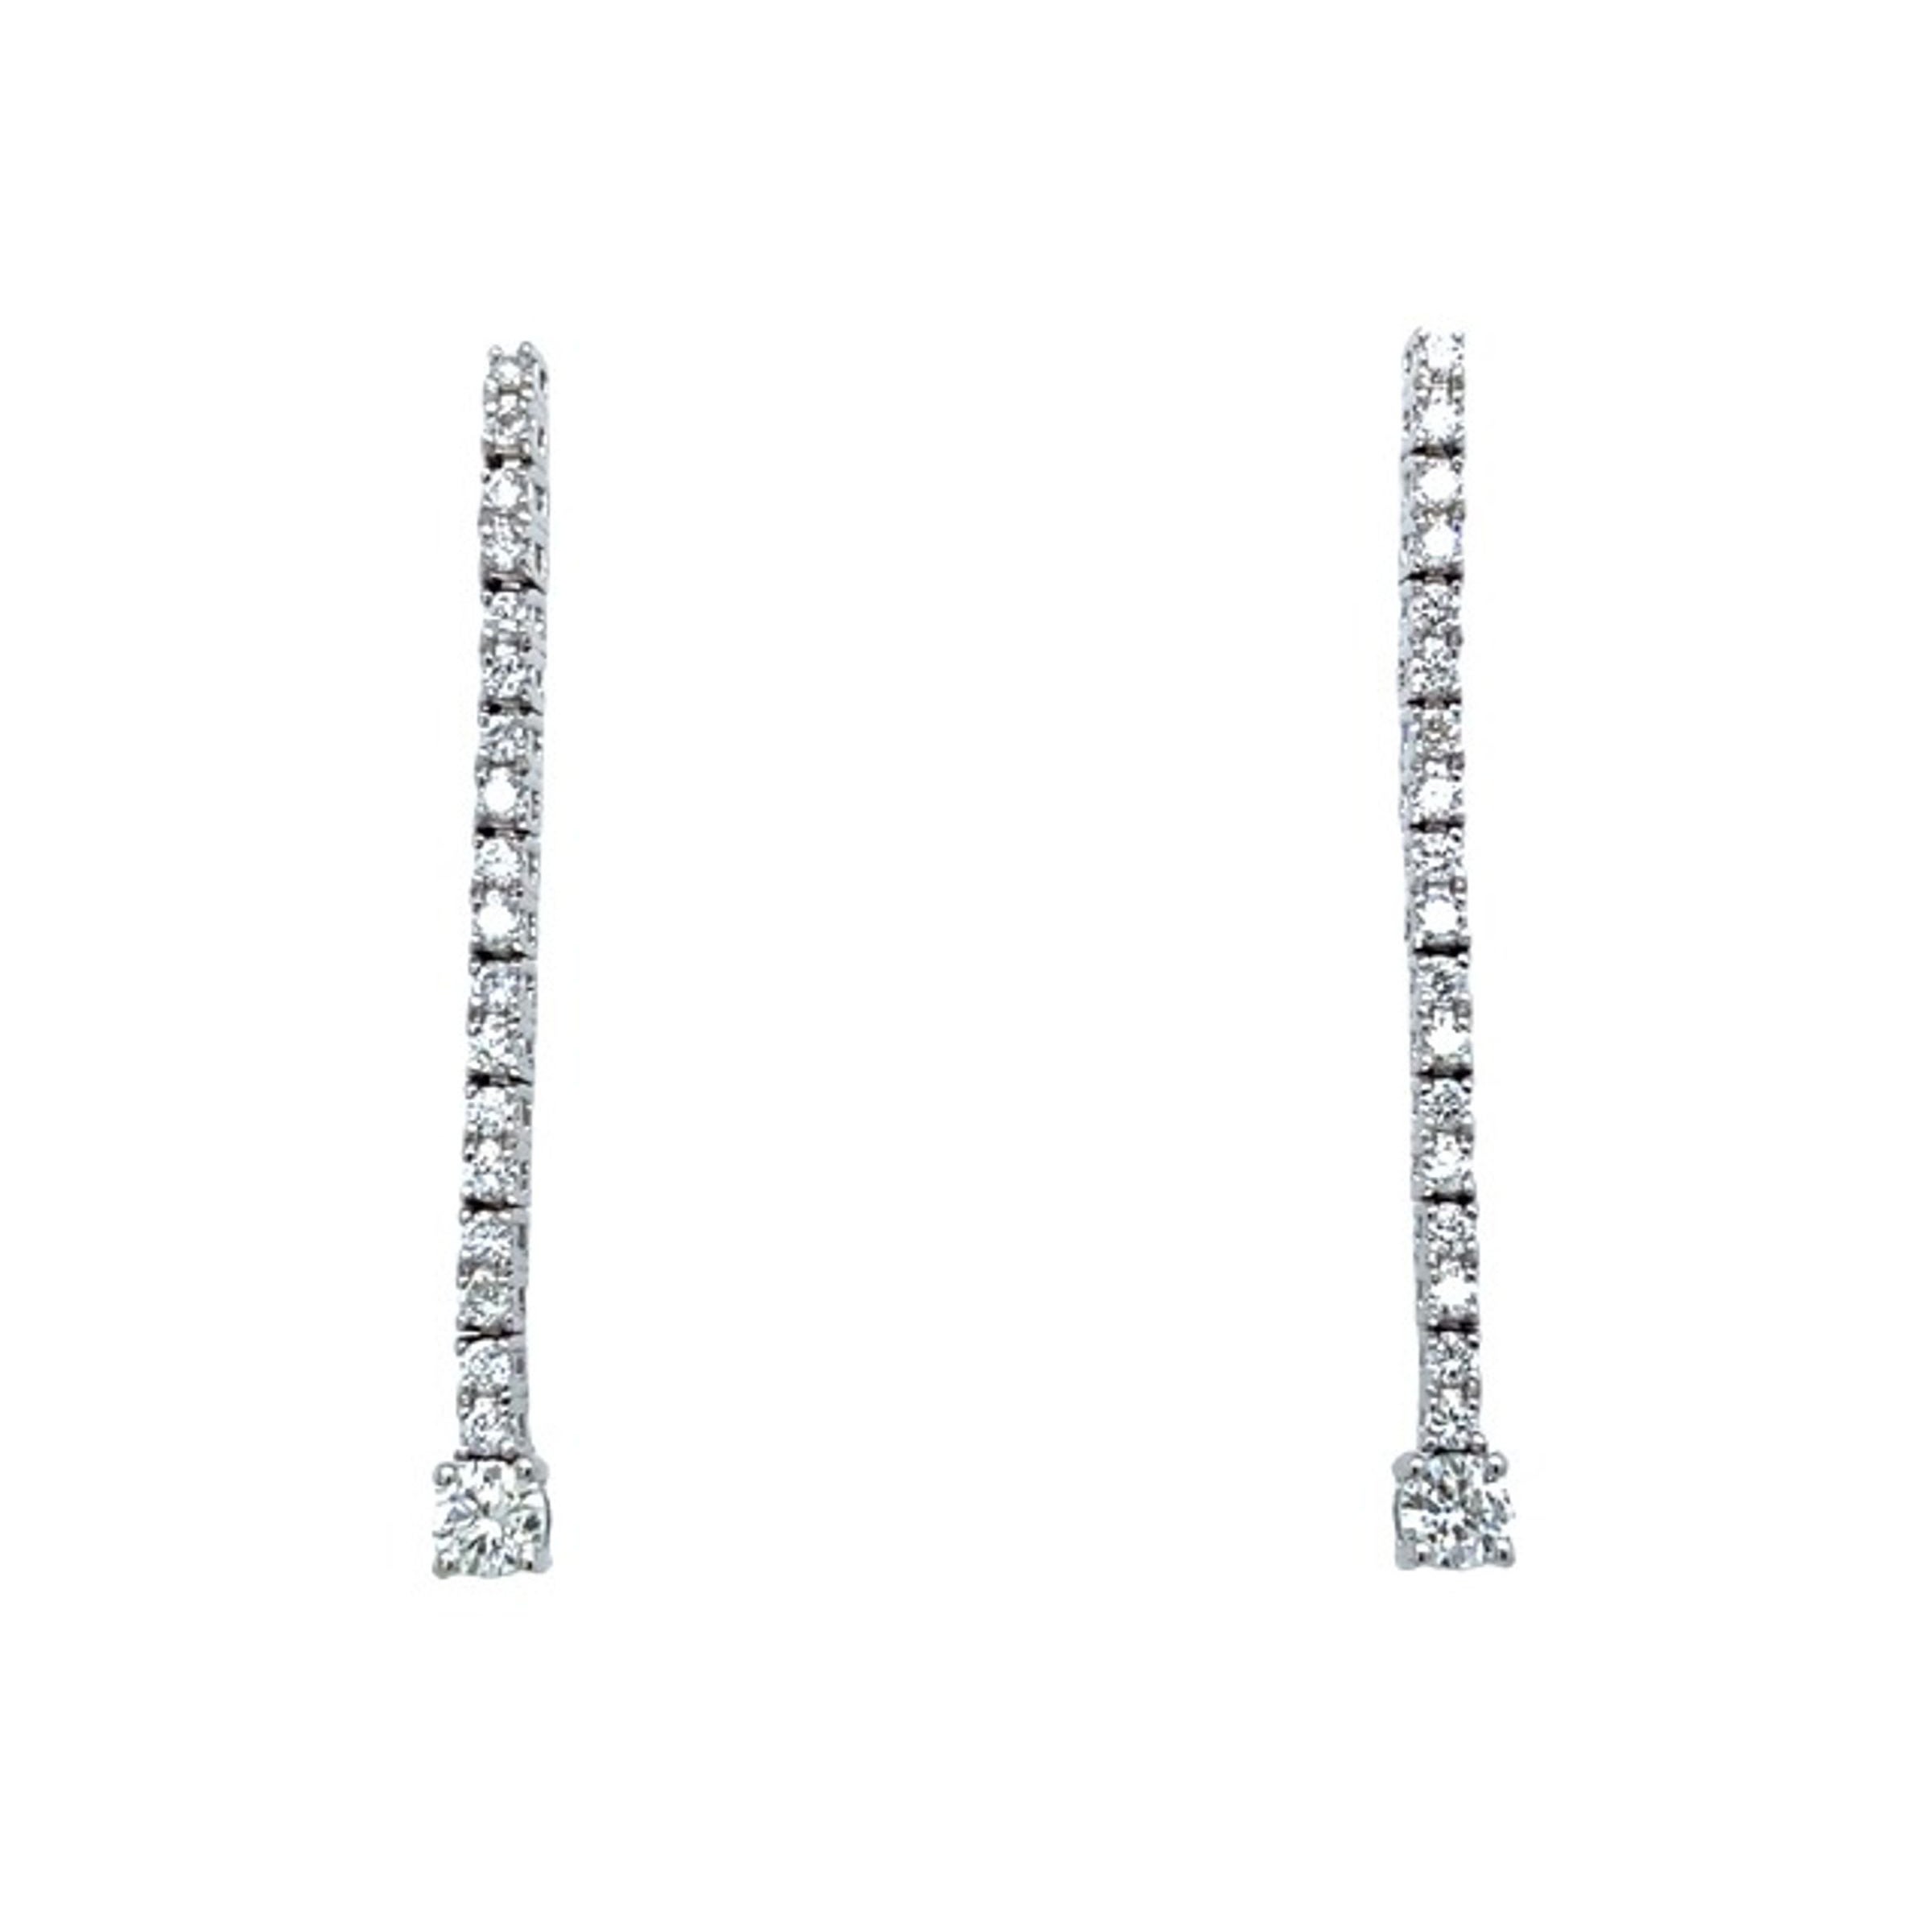 New Diamond Tennis Earrings Set with 0.56ct of Diamonds in 18ct White Gold For Sale